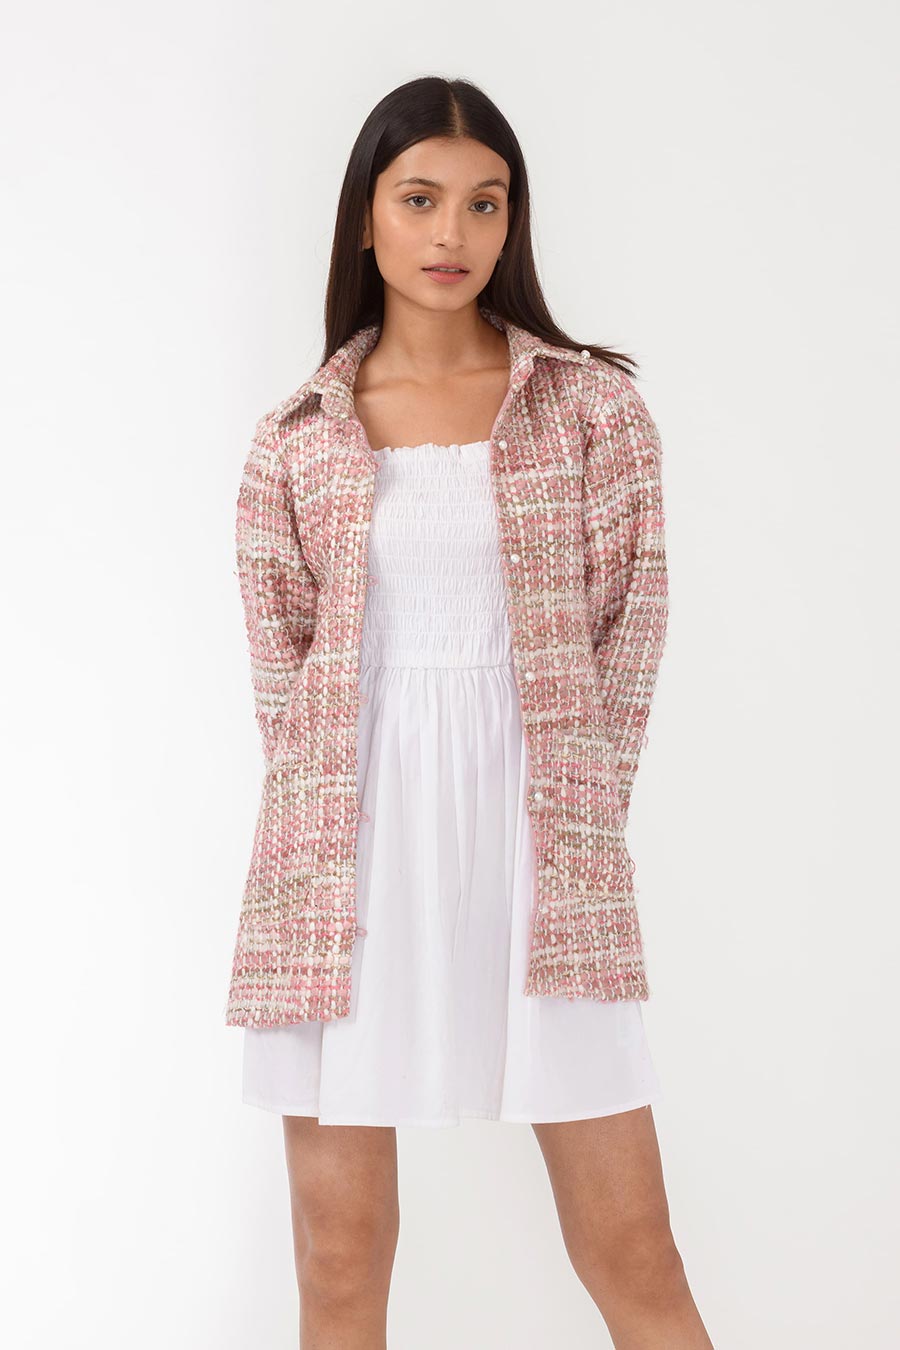 Berry Pearl Handwoven Jacket